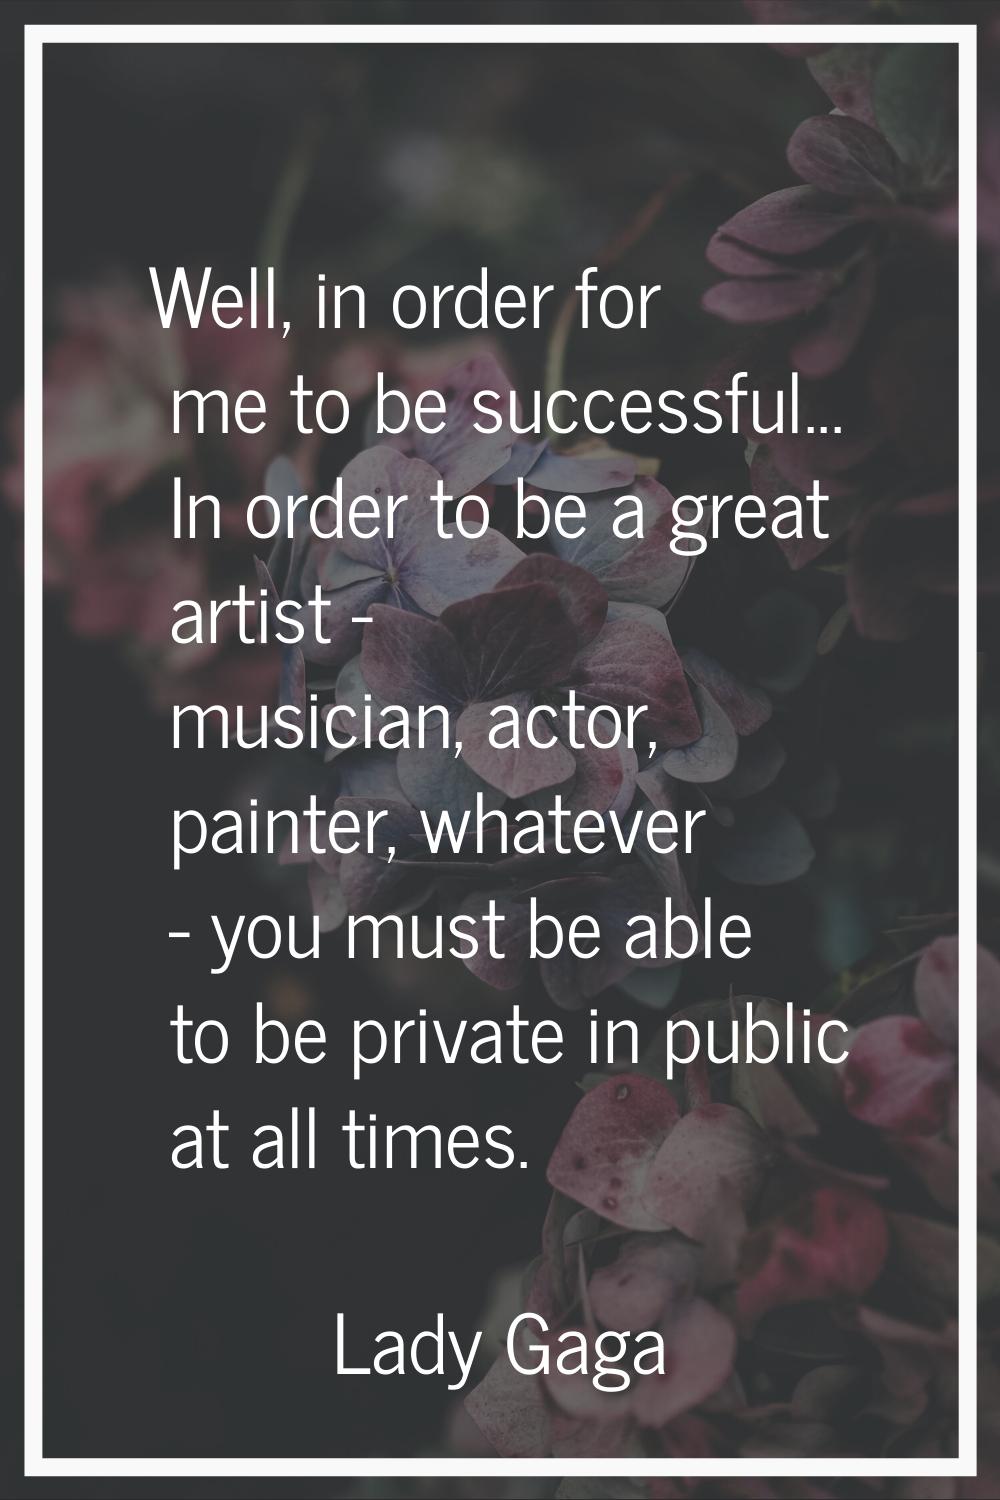 Well, in order for me to be successful... In order to be a great artist - musician, actor, painter,